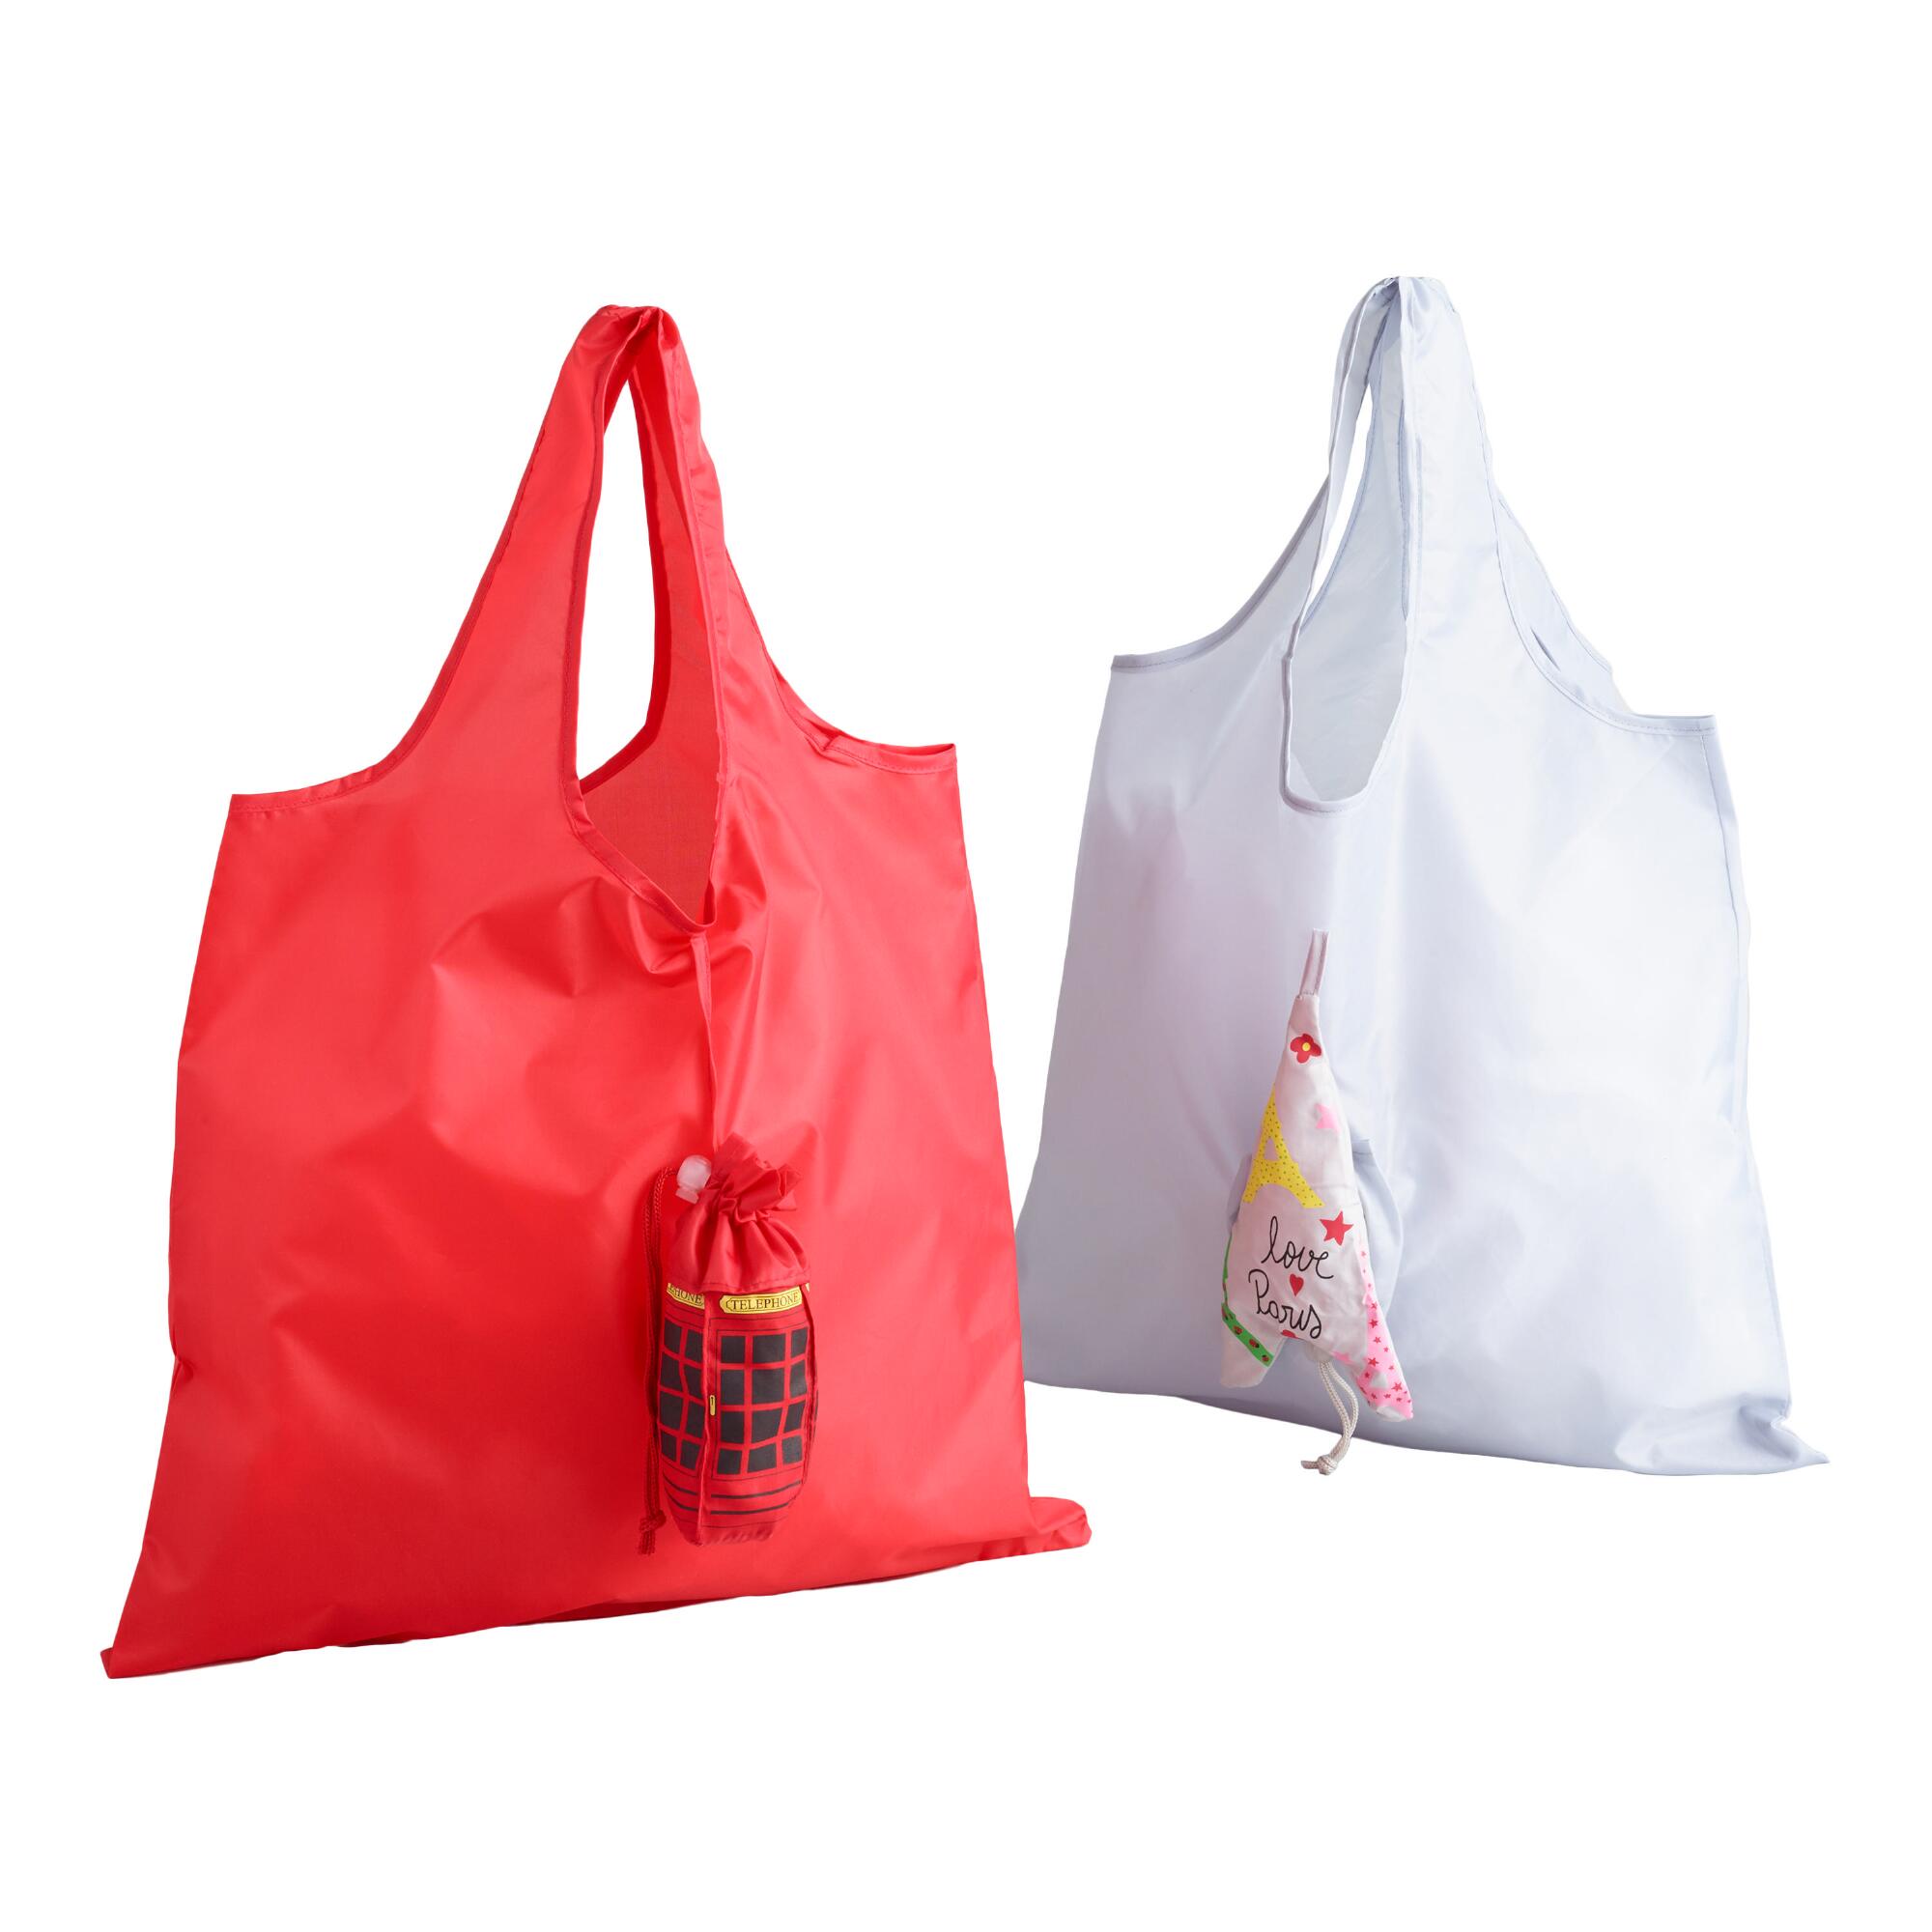 Paris and London Foldable Tote Bags Set of 2 by World Market